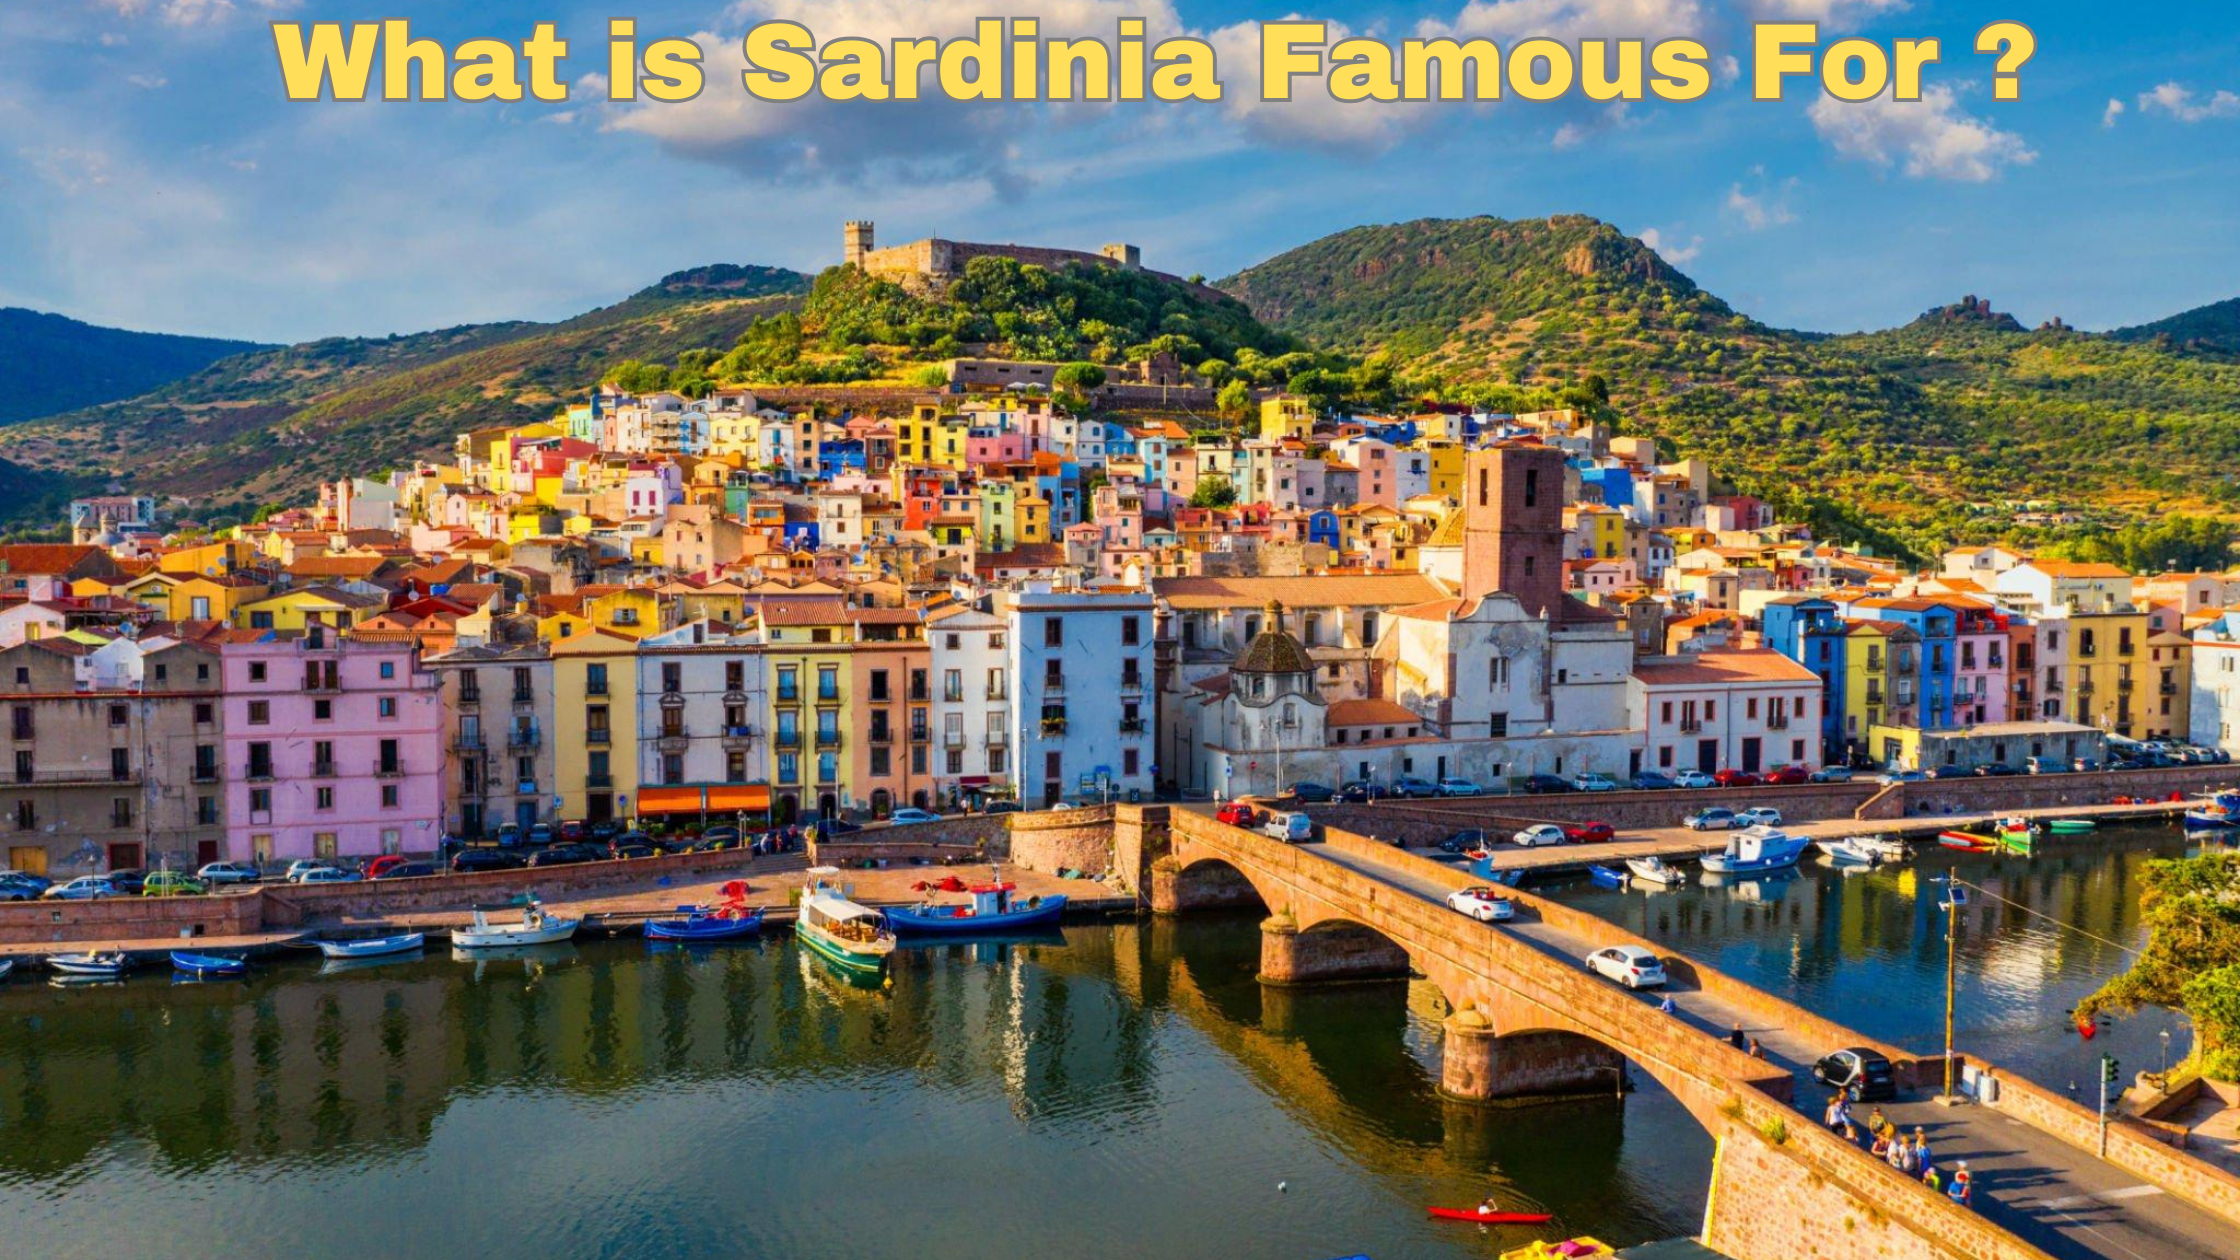 What is Sardinia Famous For